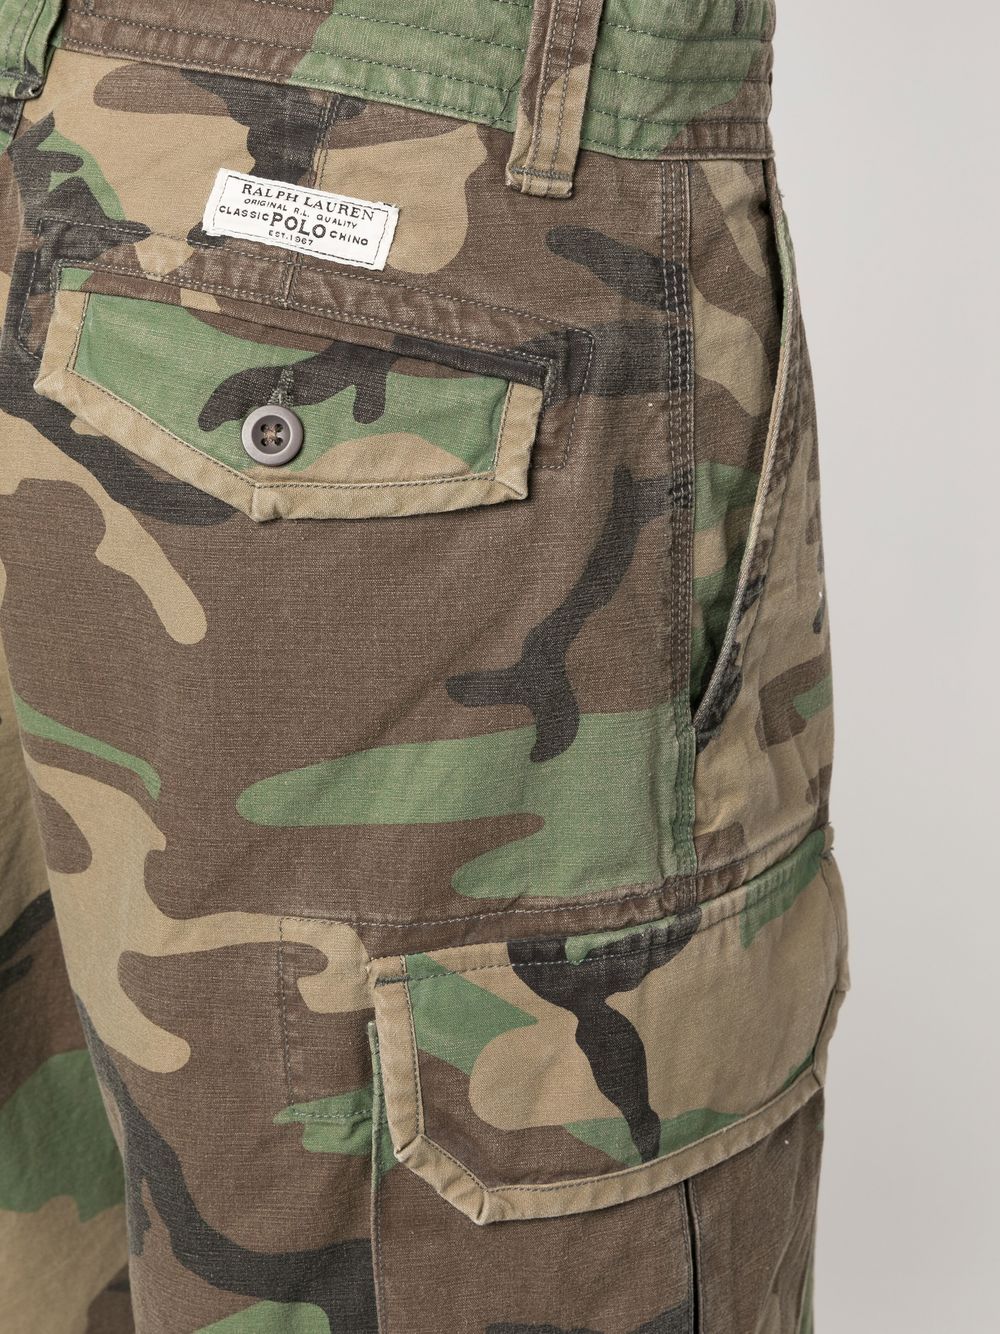 Shorts cargo in cotone con stampa camouflage